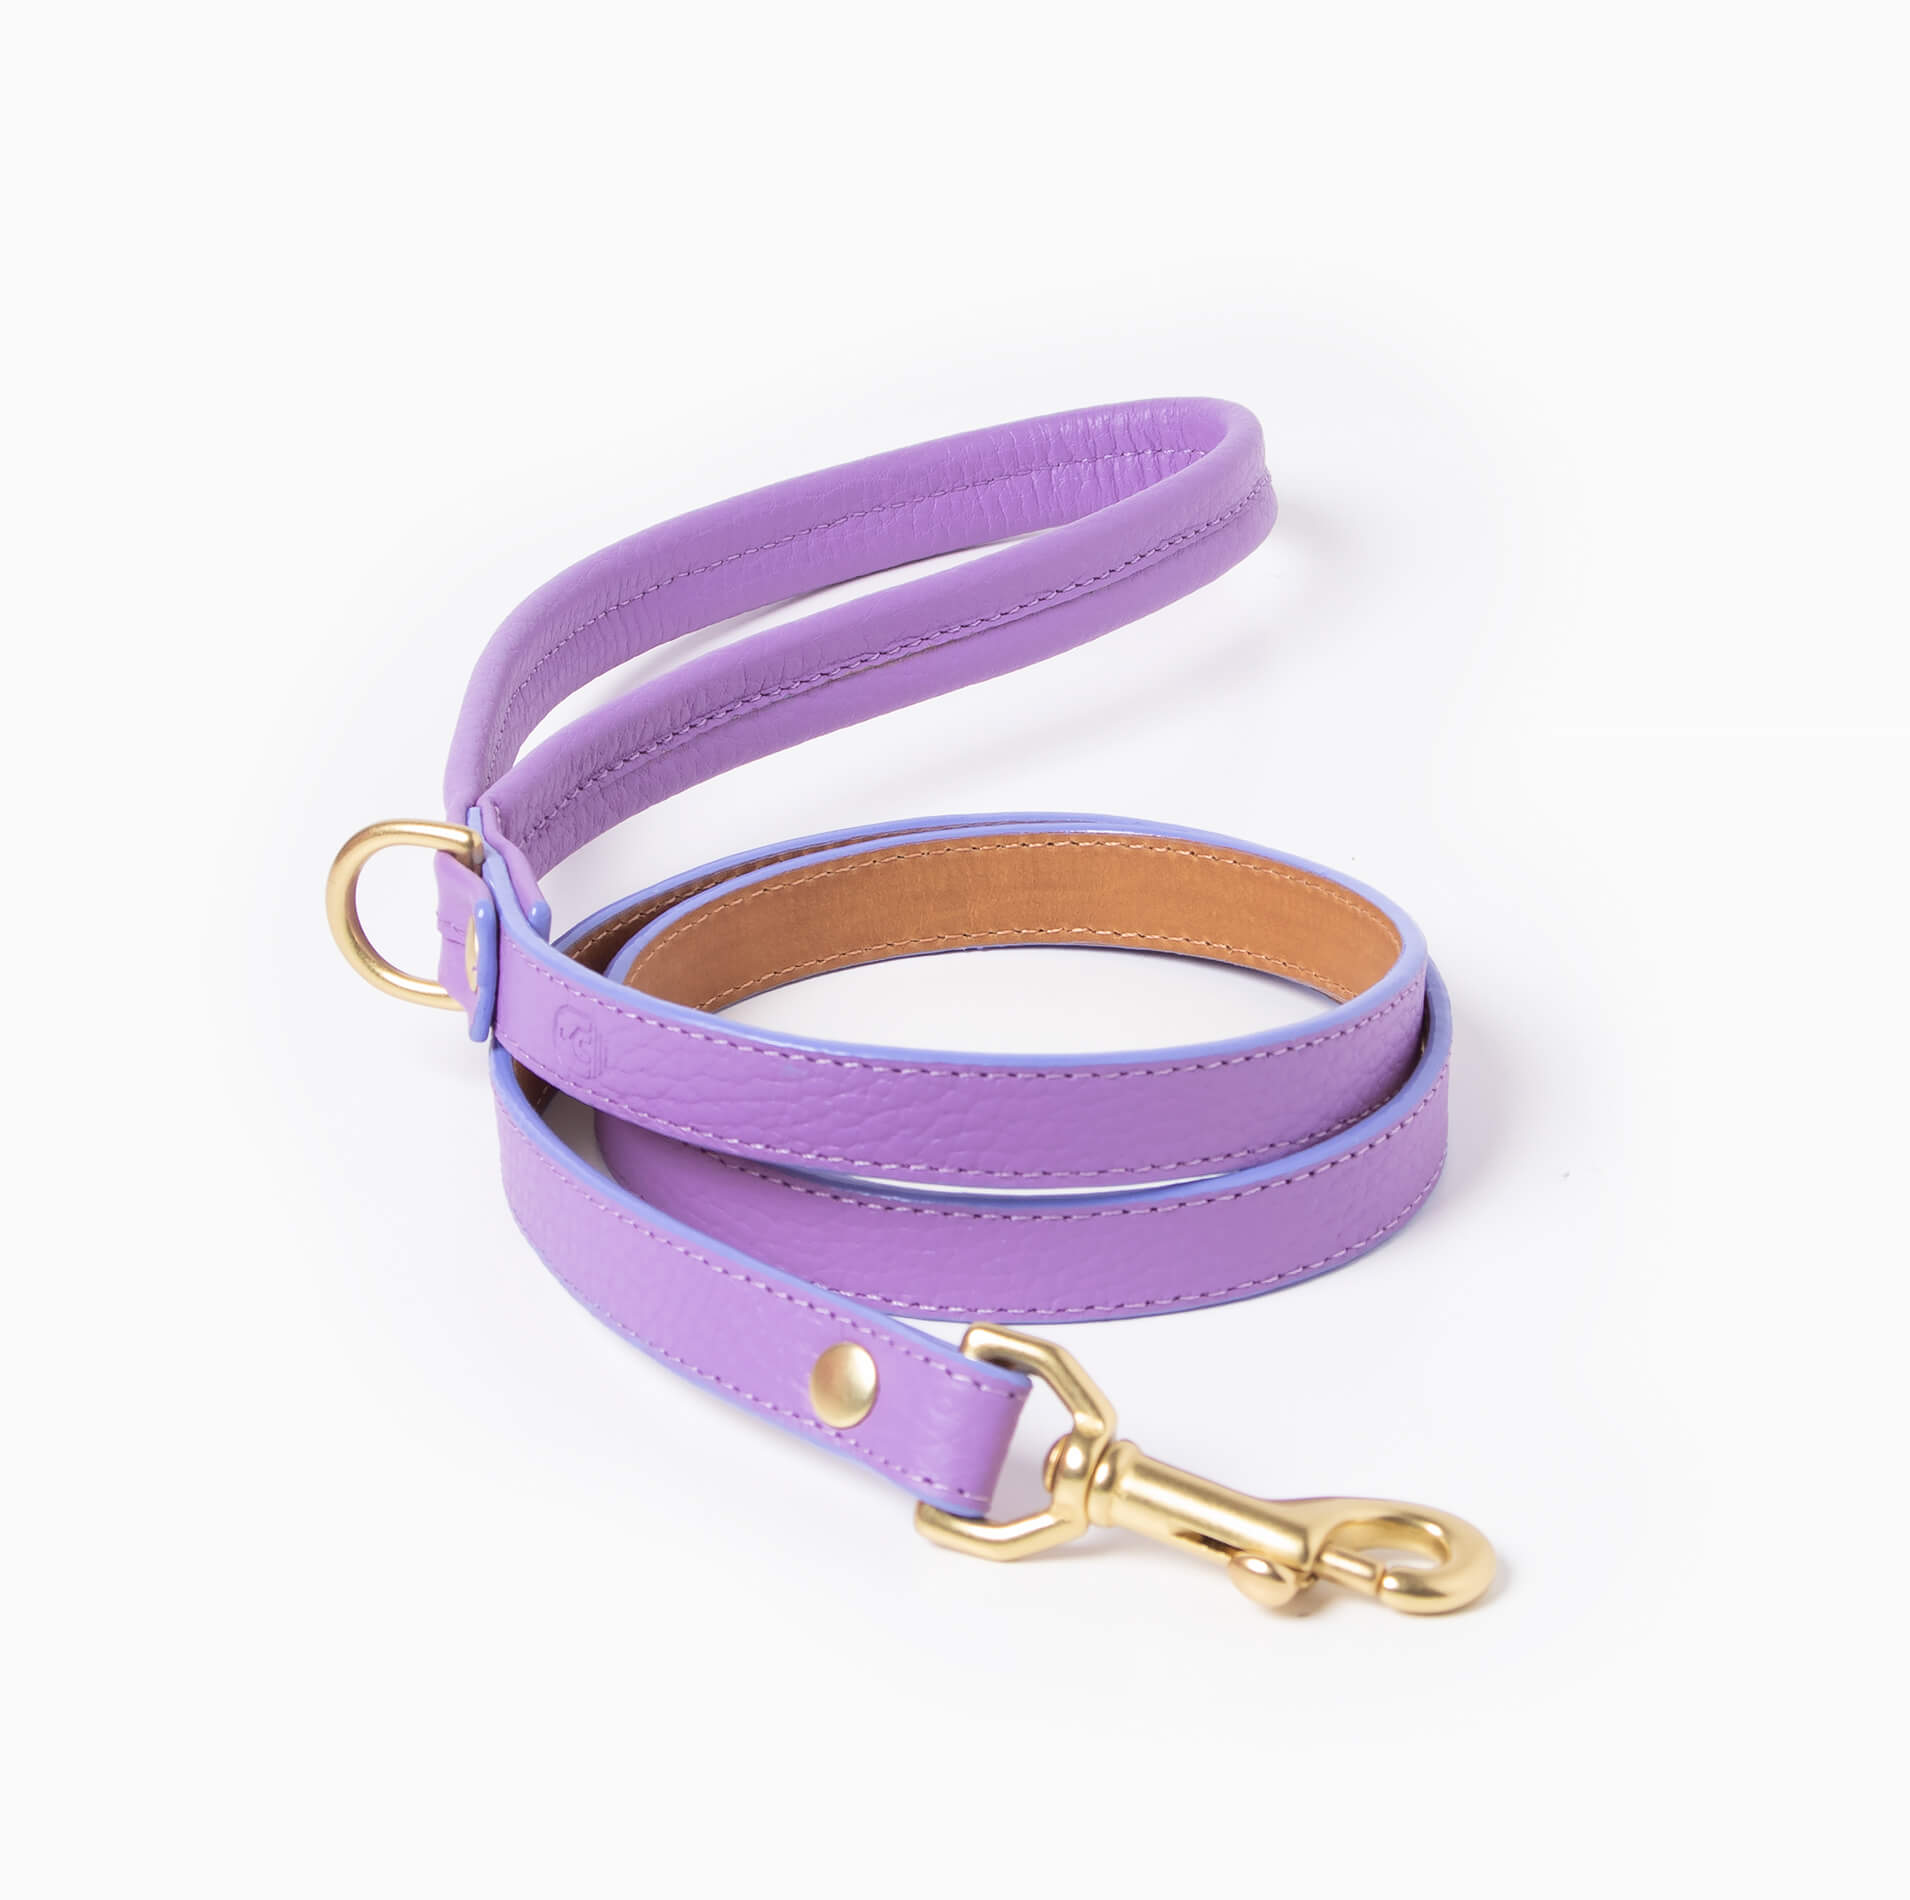 Lilac leather dog leash with brass hardware